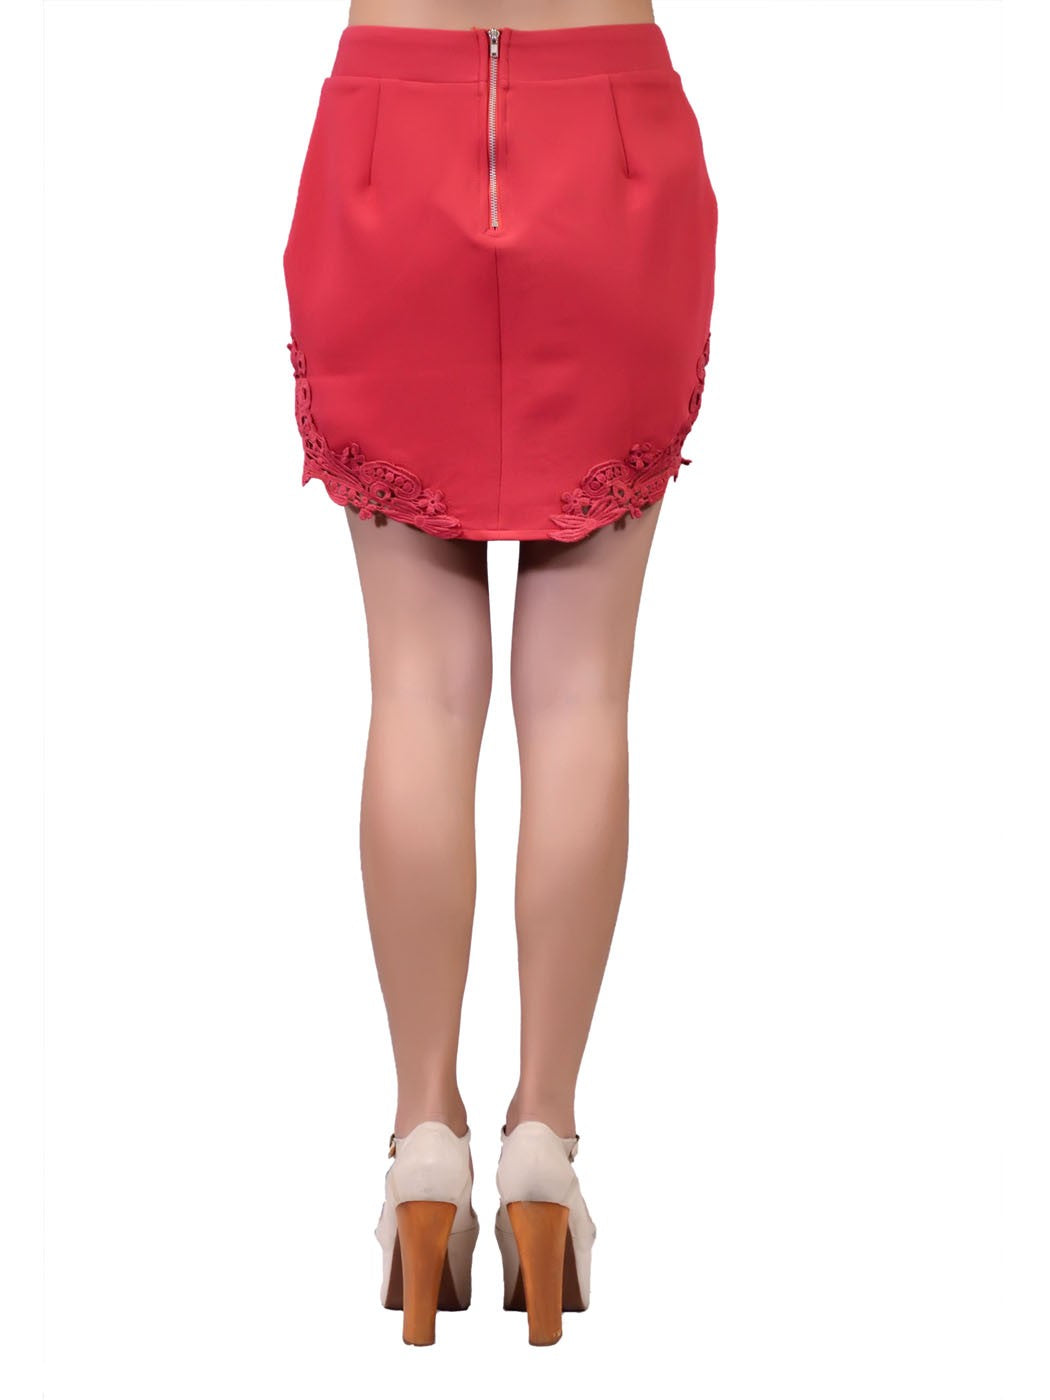 Cotton Candy Girly Red Mini Skirt With Two Side Embroidery Cut Out Lace Design - ALILANG.COM